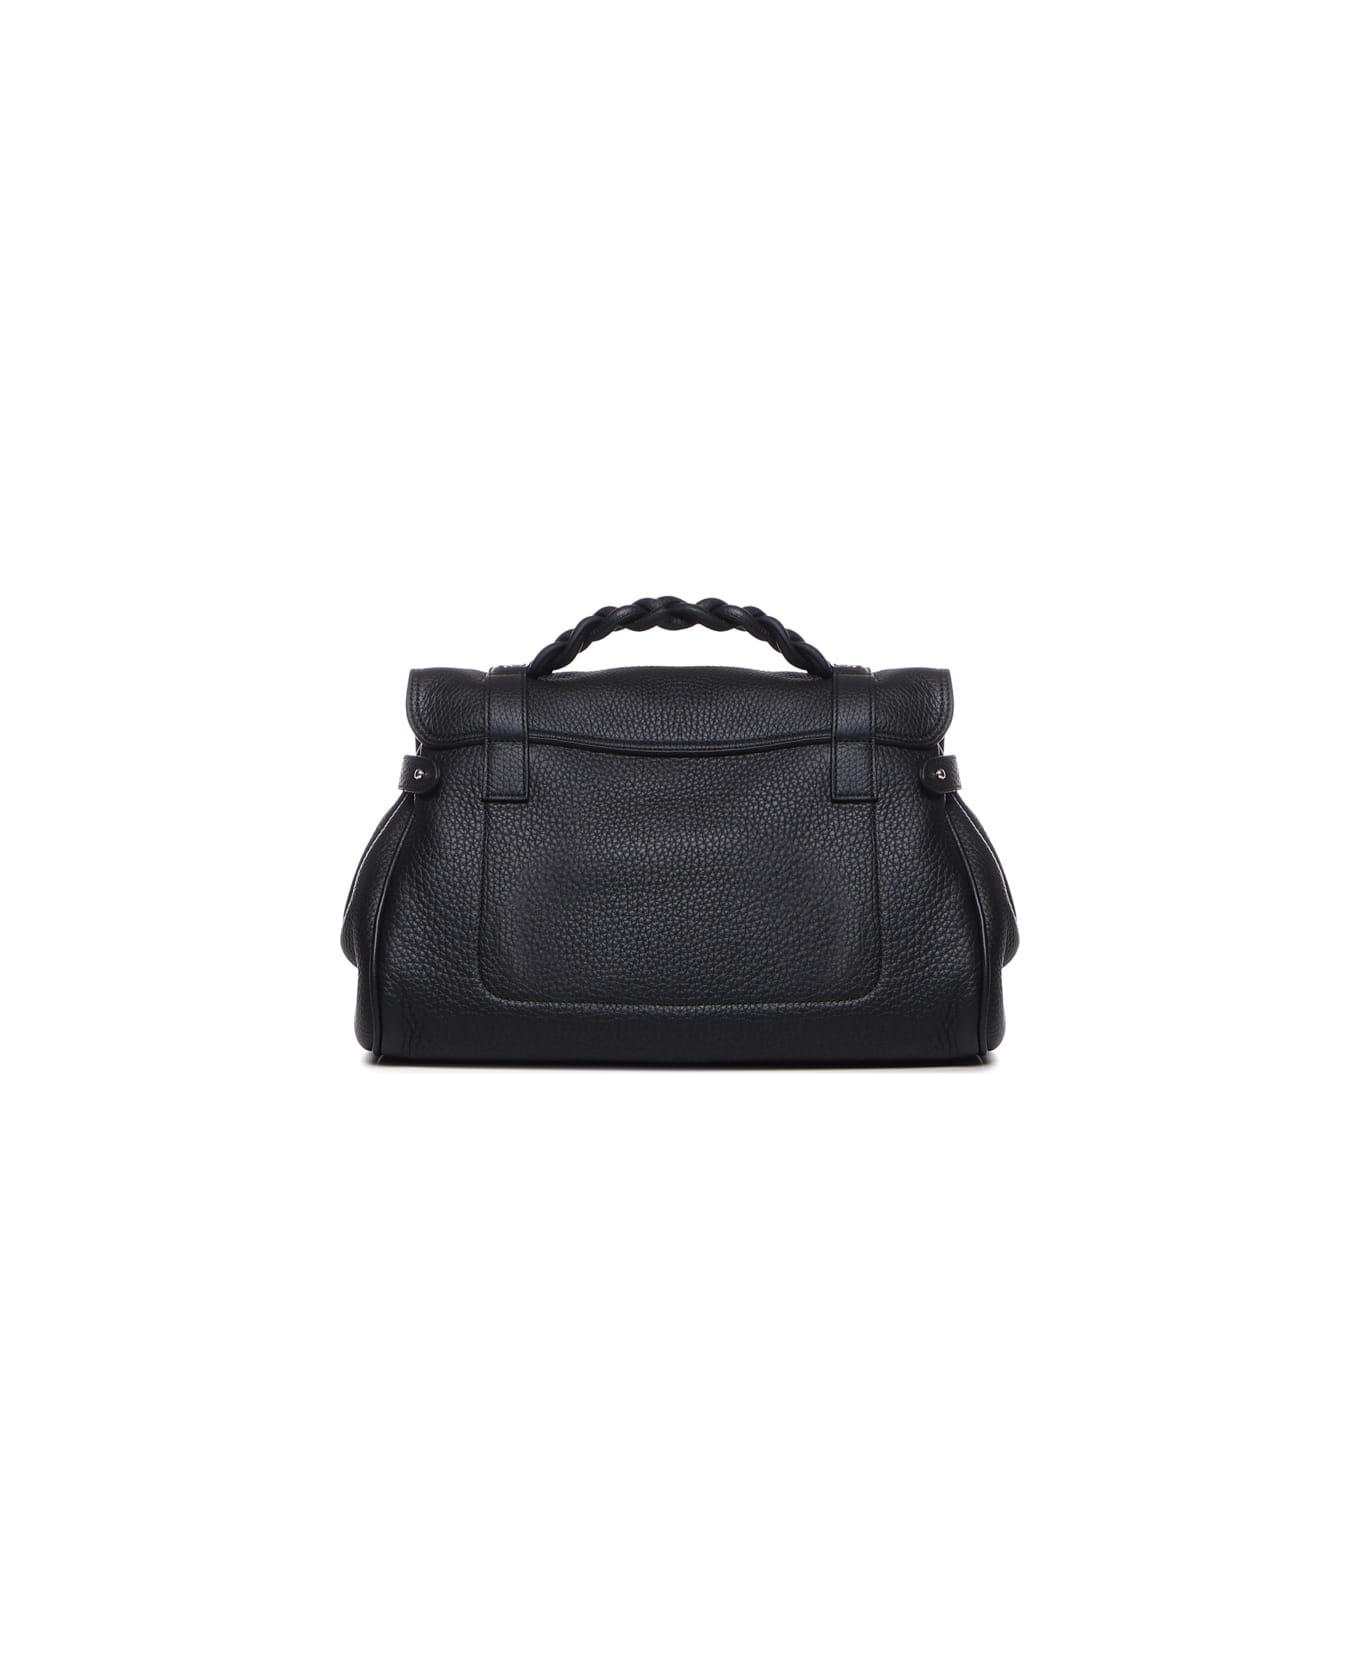 Mulberry Alexa Bag With Leather Braided Handle - Black トートバッグ